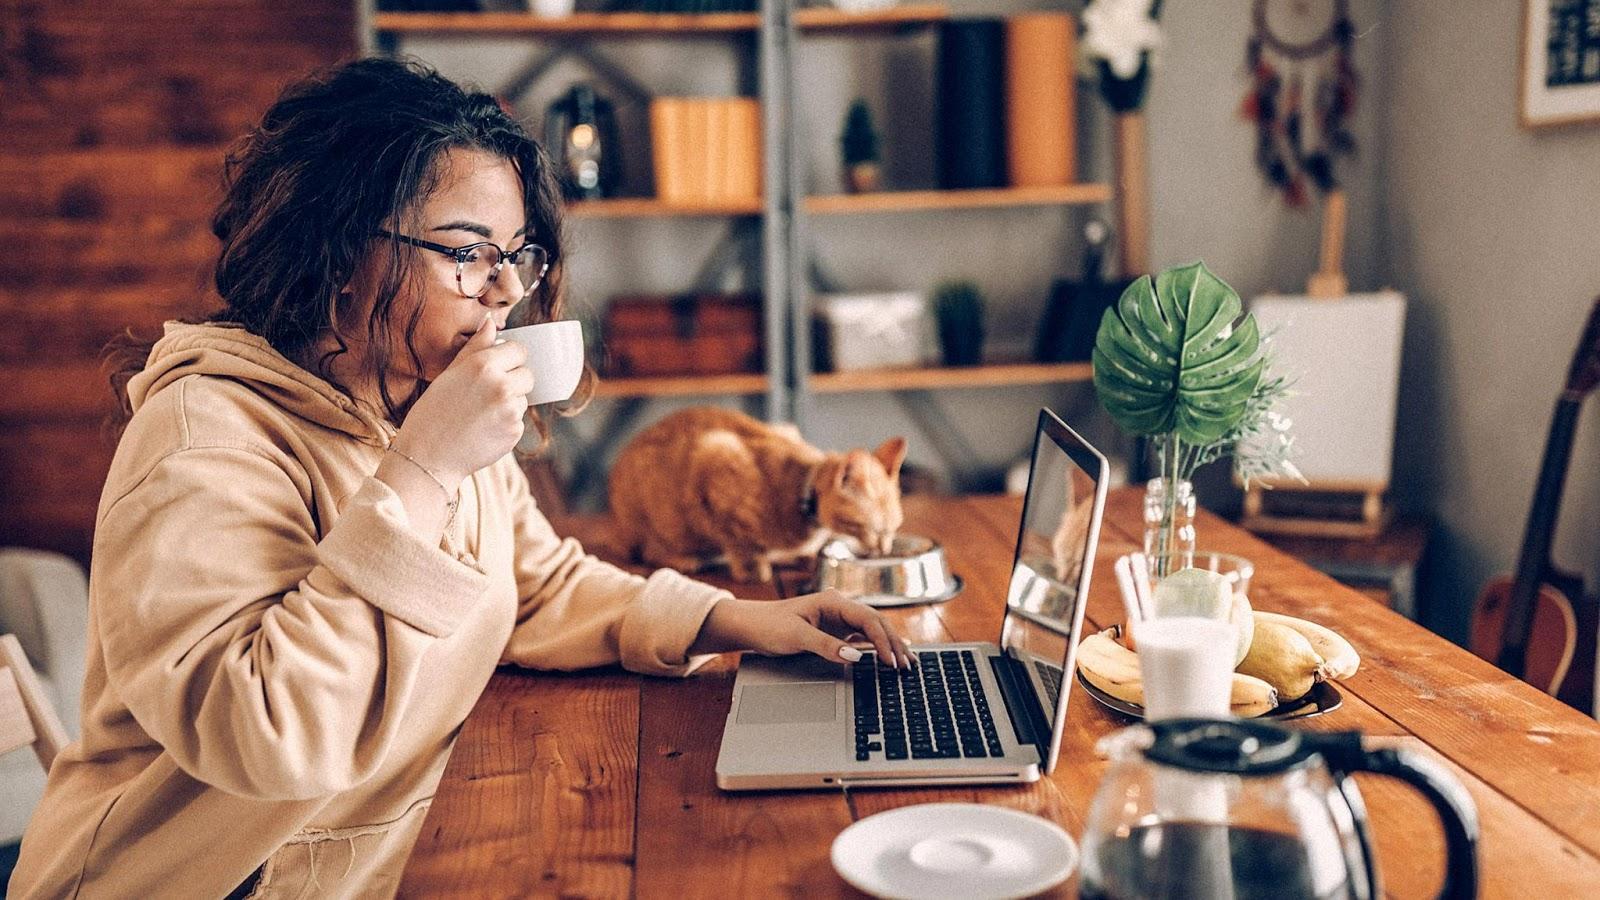 Top In-demand Skills For Remote Work